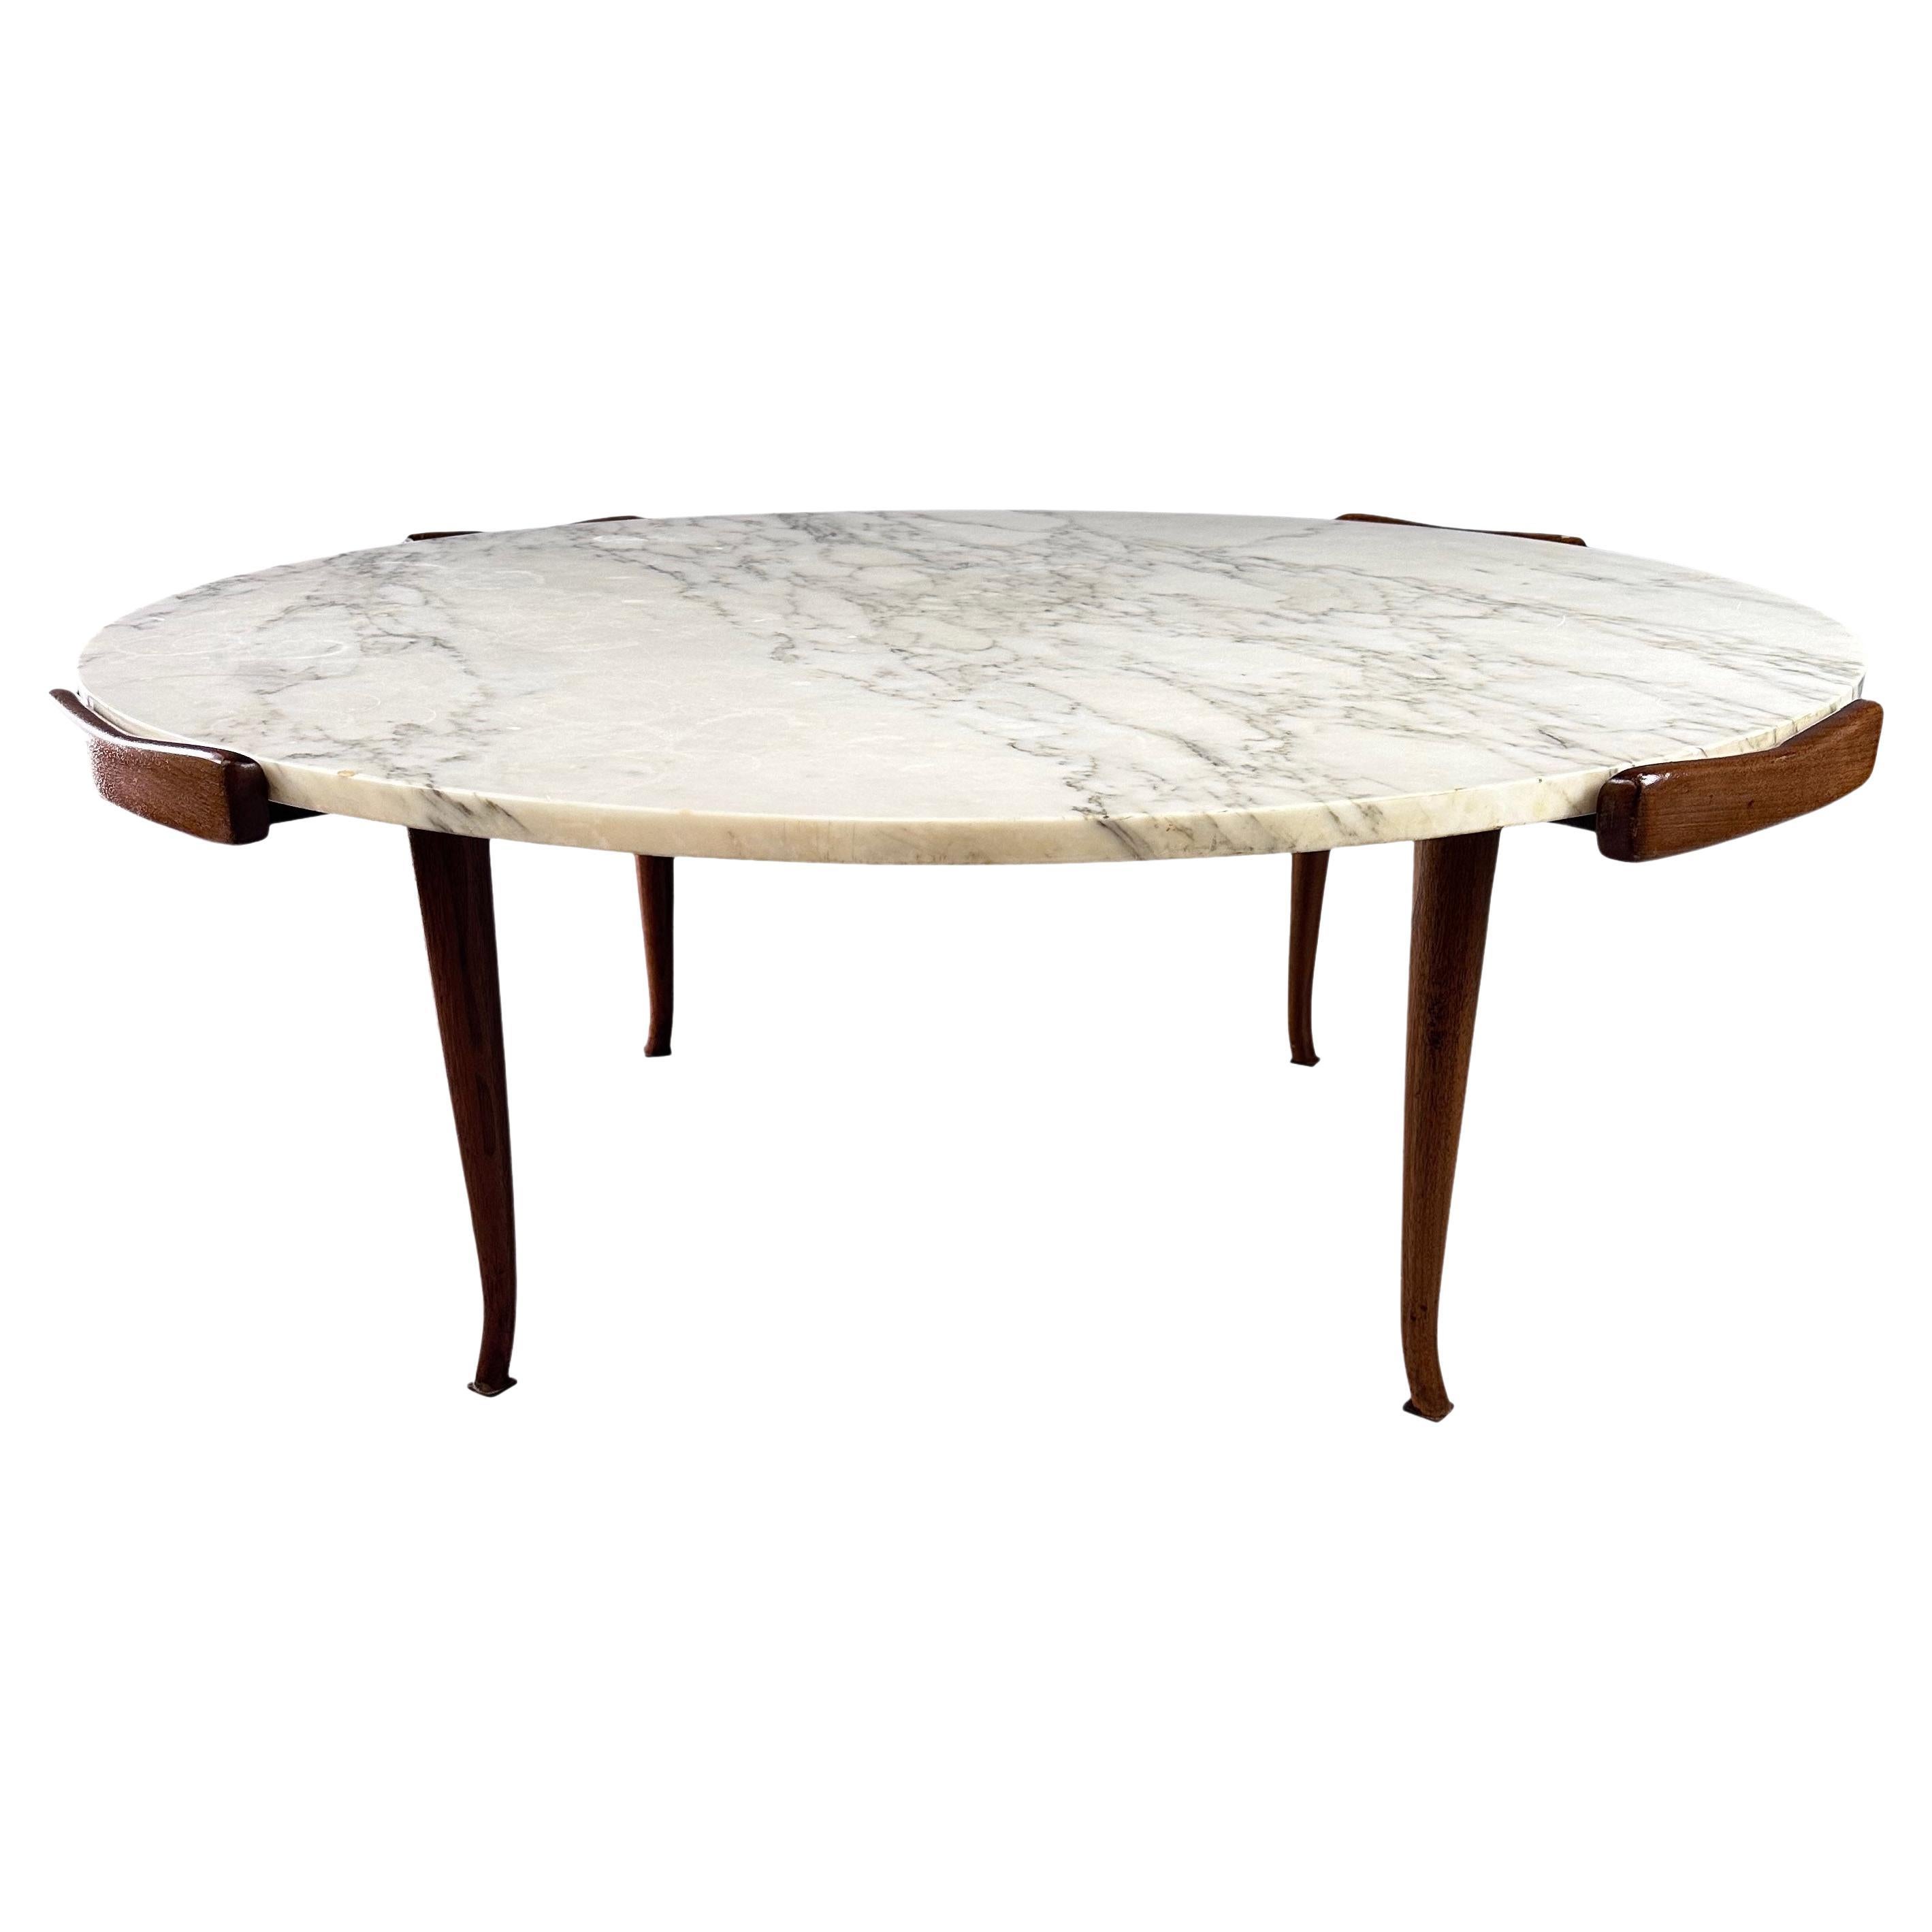 Erno Fabry Coffee Table in Carrara Marble and a Walnut Base with Curvacrous Legs For Sale